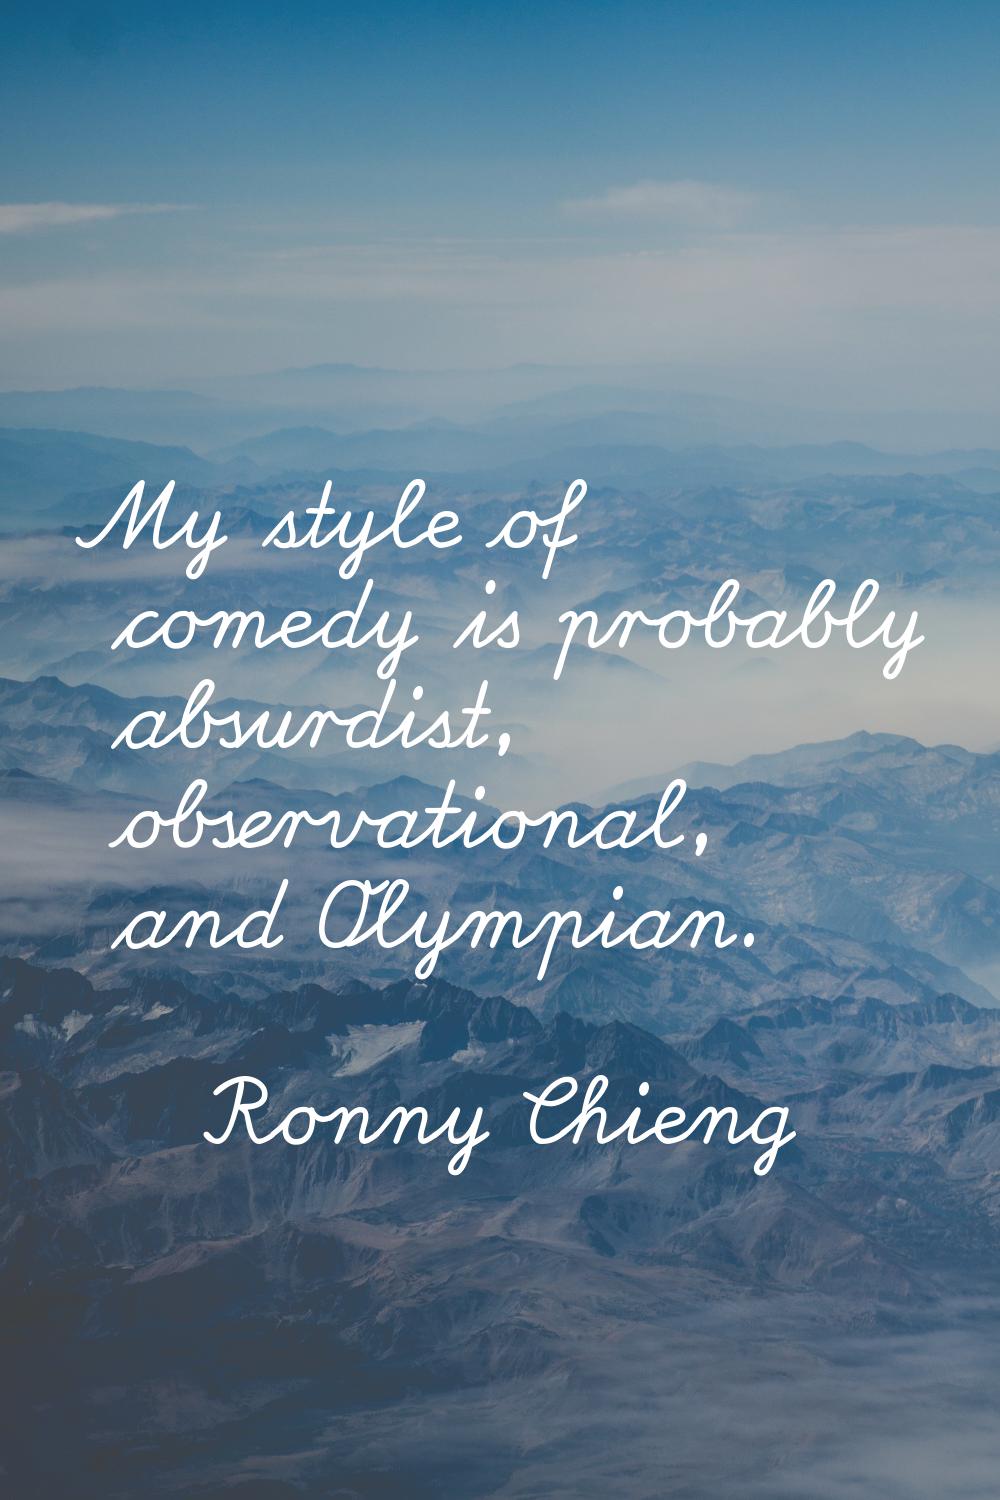 My style of comedy is probably absurdist, observational, and Olympian.